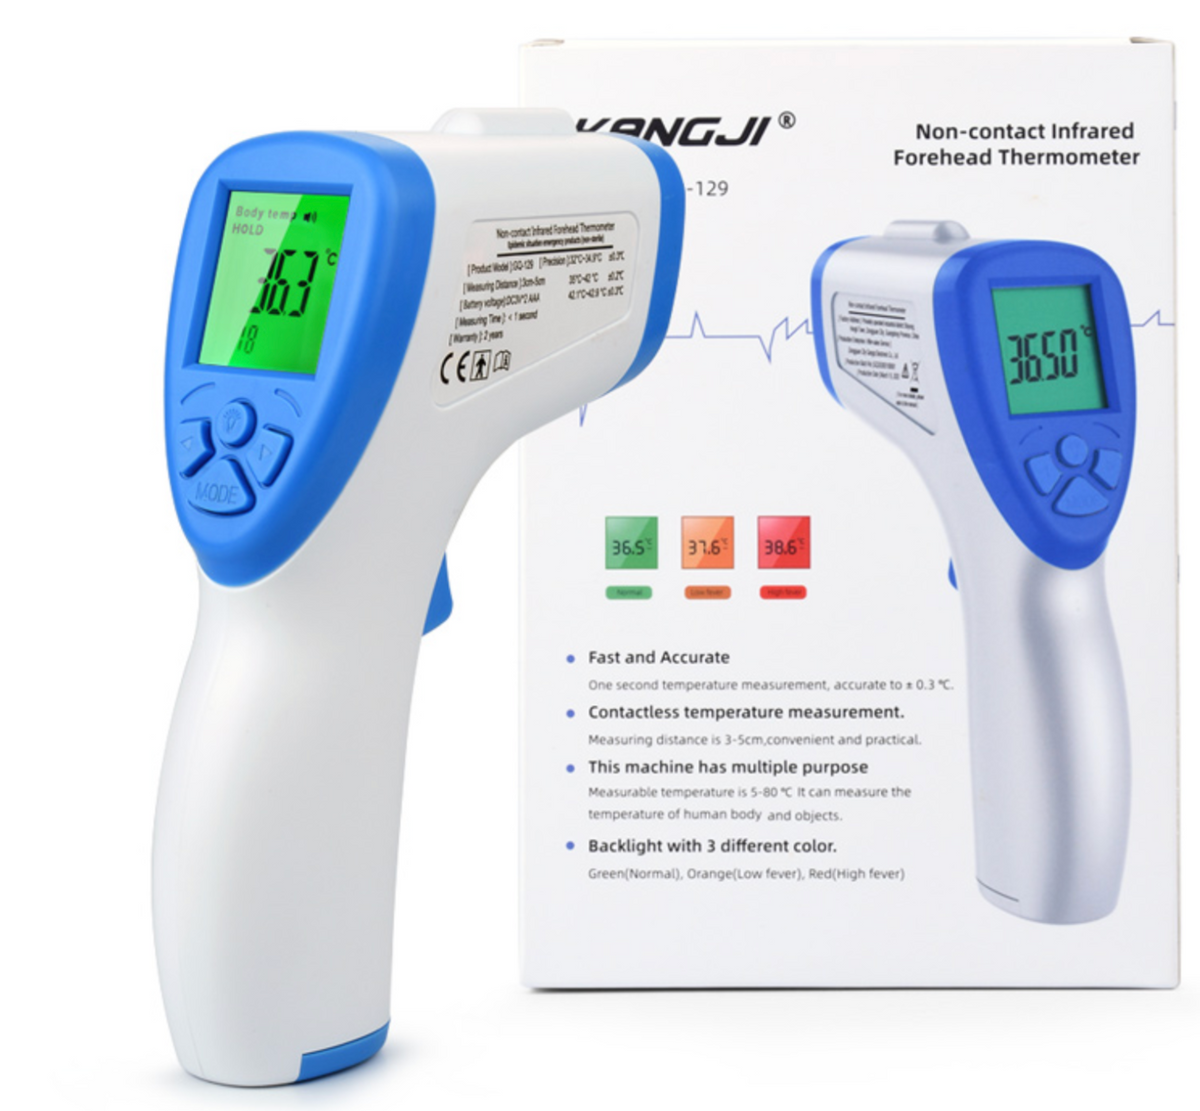 Infrared Thermometers to measure body temperature from a distance